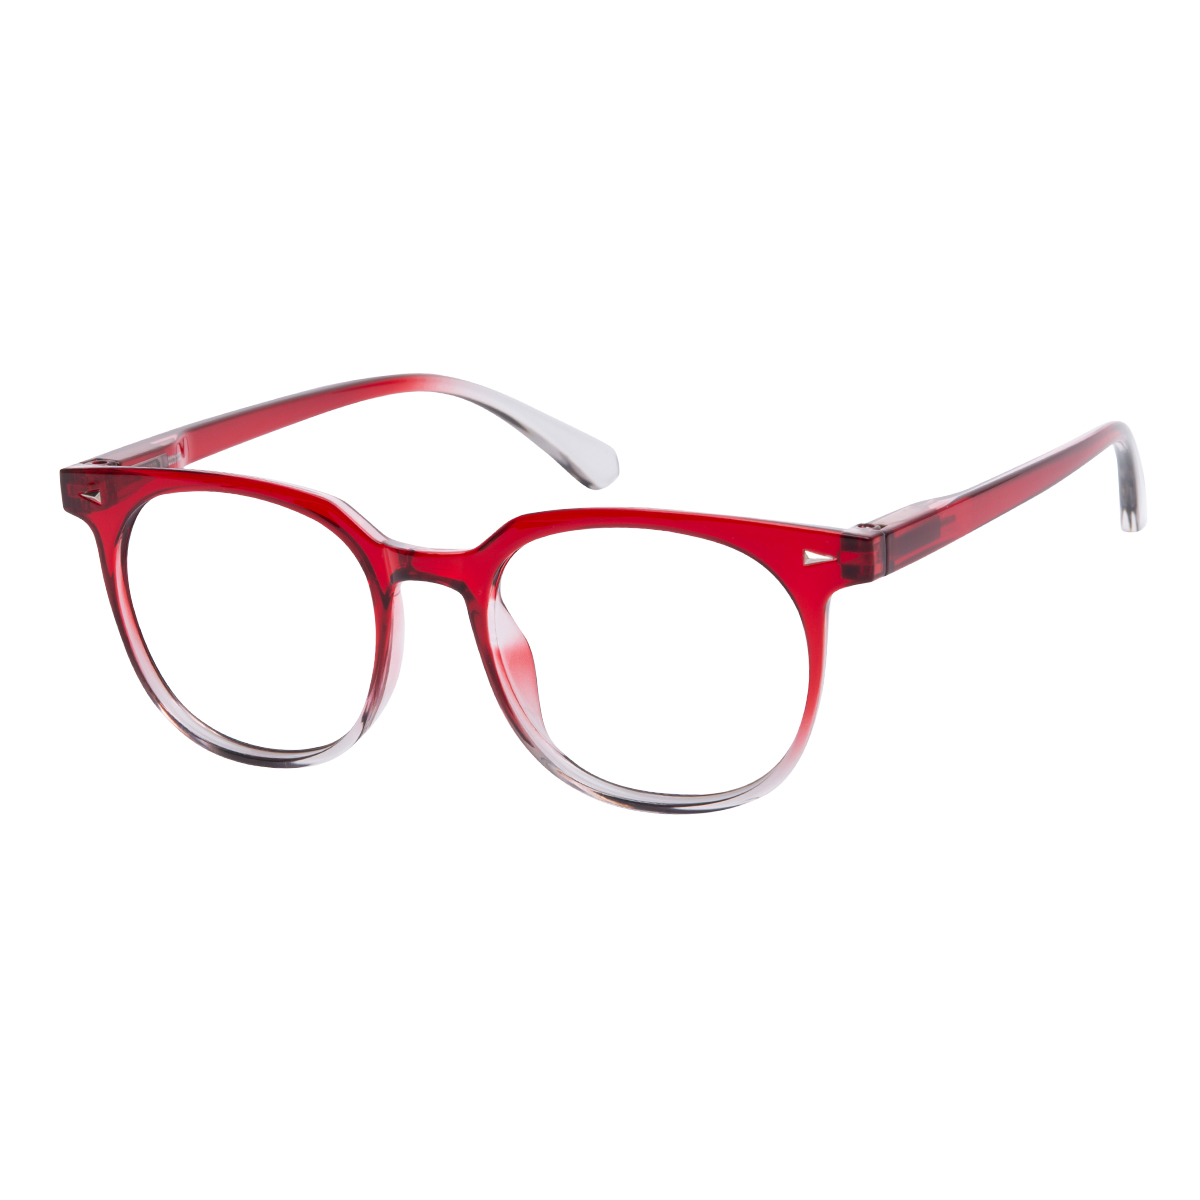 Lorde - Round Translucent Red Reading Glasses for Men & Women